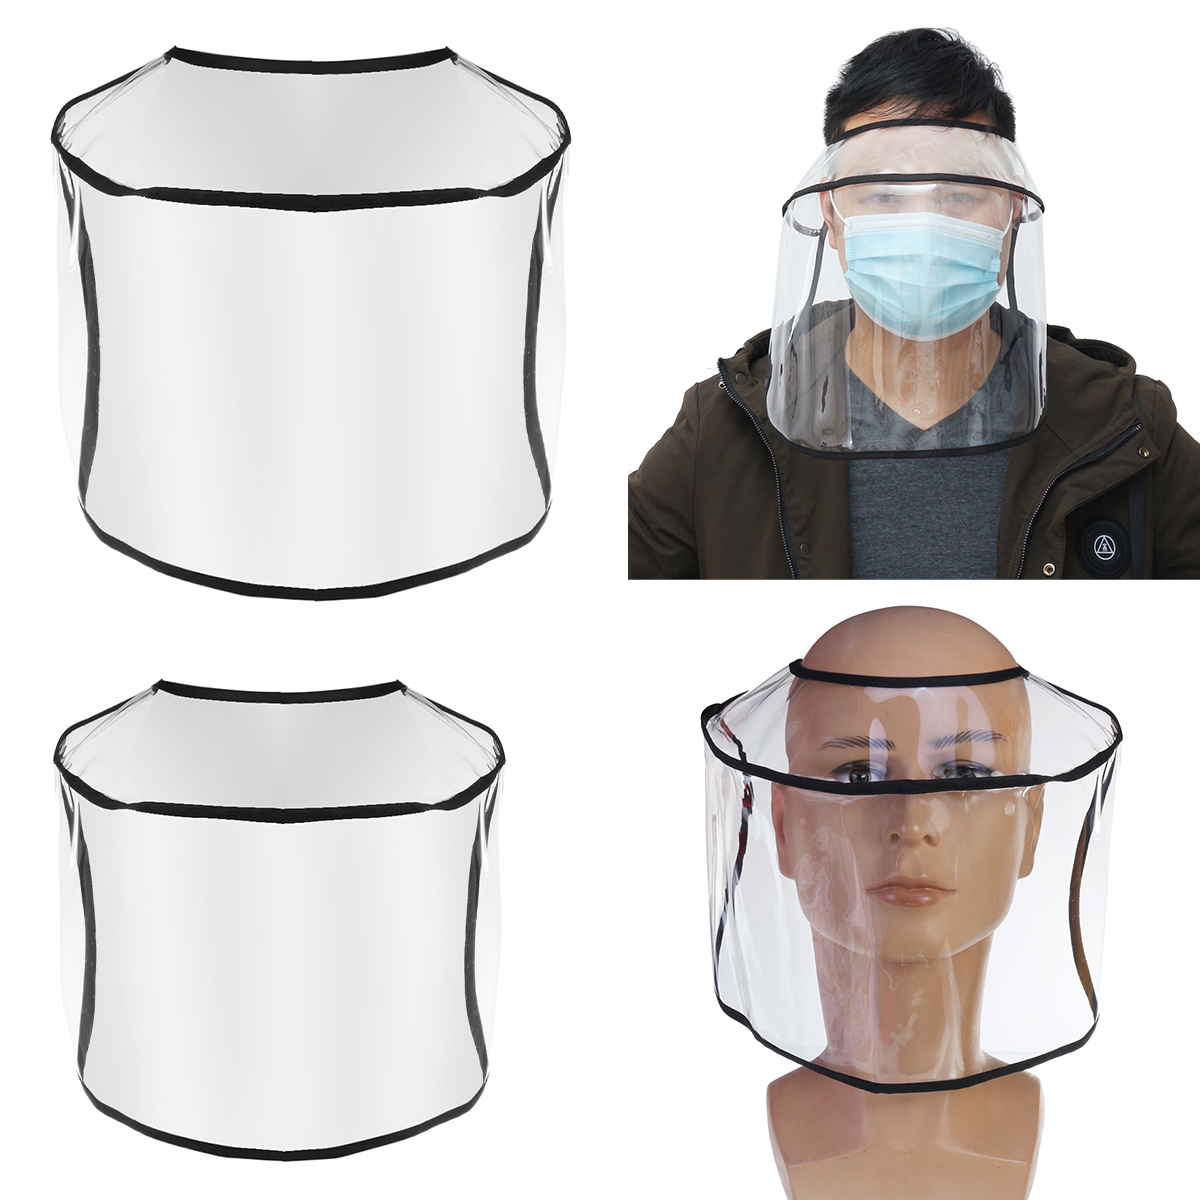 PVC-Transparent-Breathable-Splash-proof-Dustproof-Full-Face-Mask-Disassembleable-For-All-Hats-Fishma-1660688-5